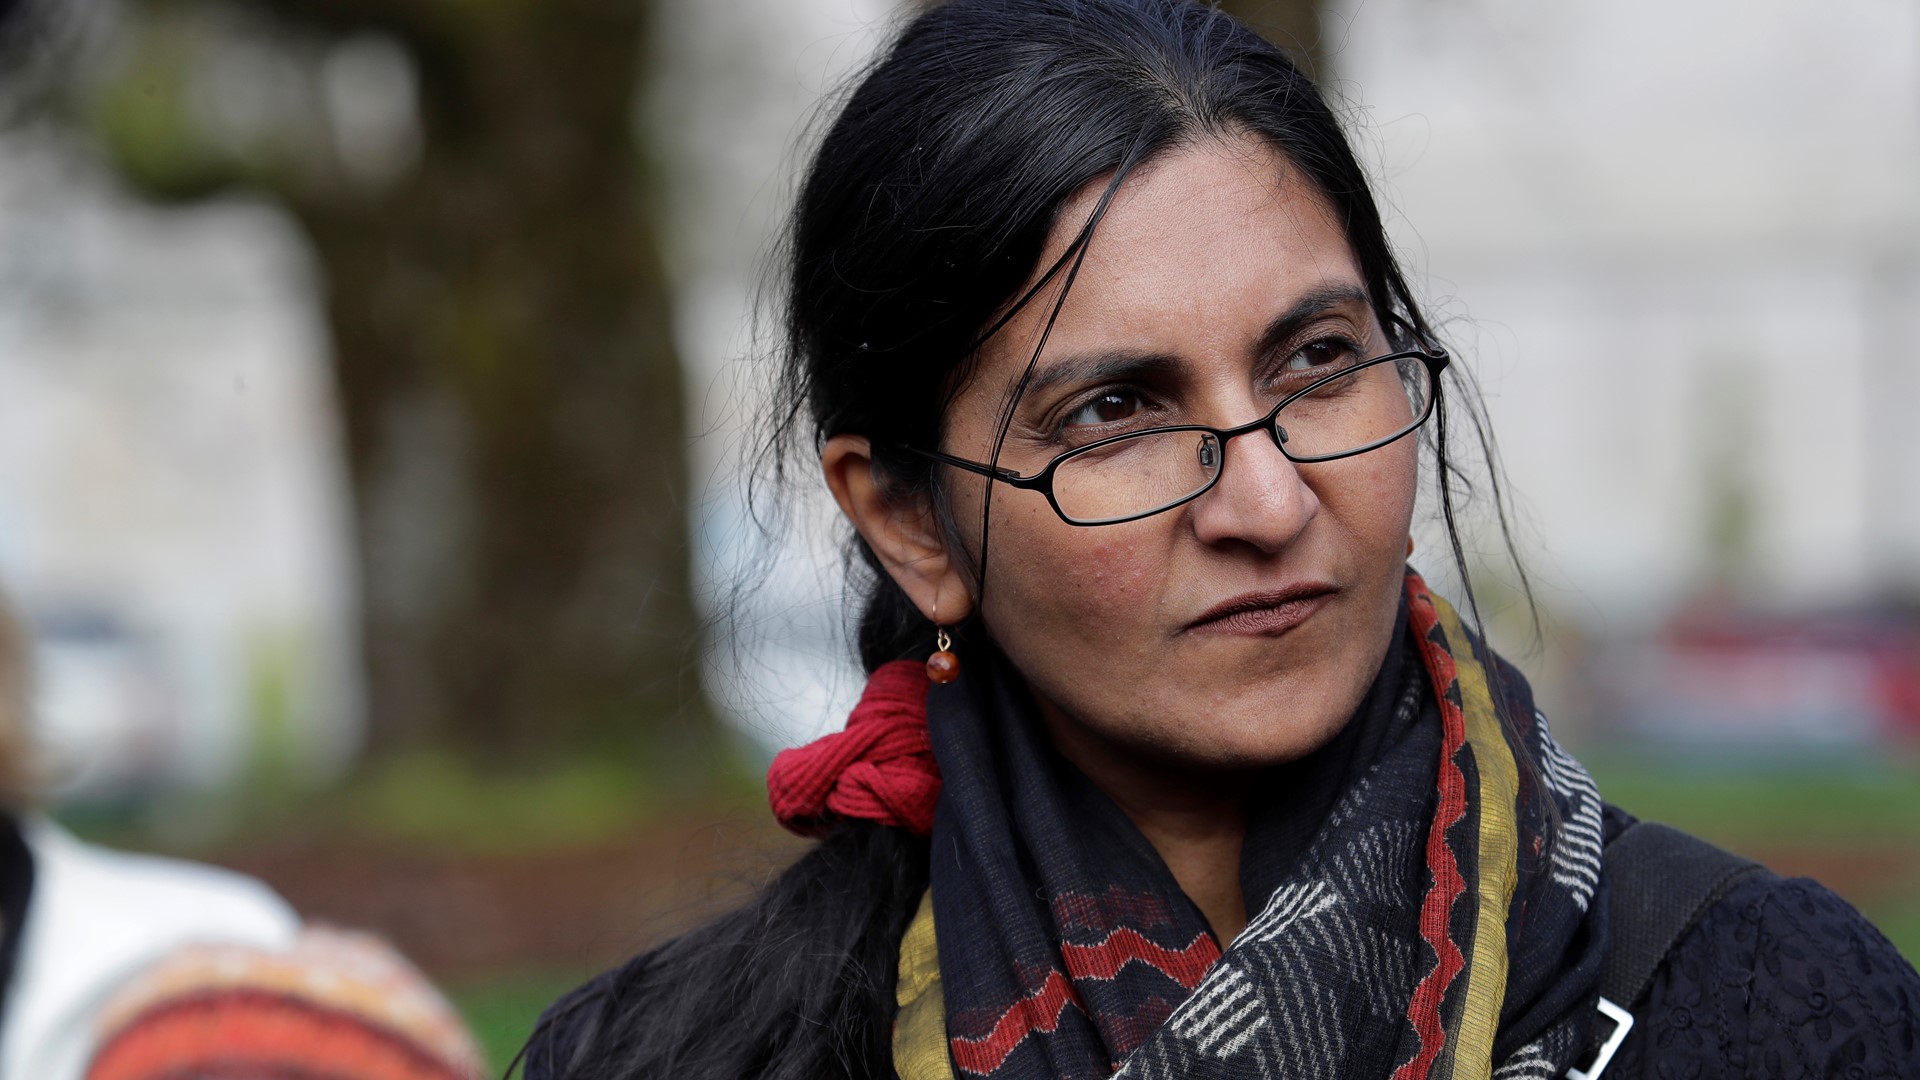 In an op-ed for The Stranger, Kshama Sawant said she is launching Workers Strike Back, a national labor movement, in March